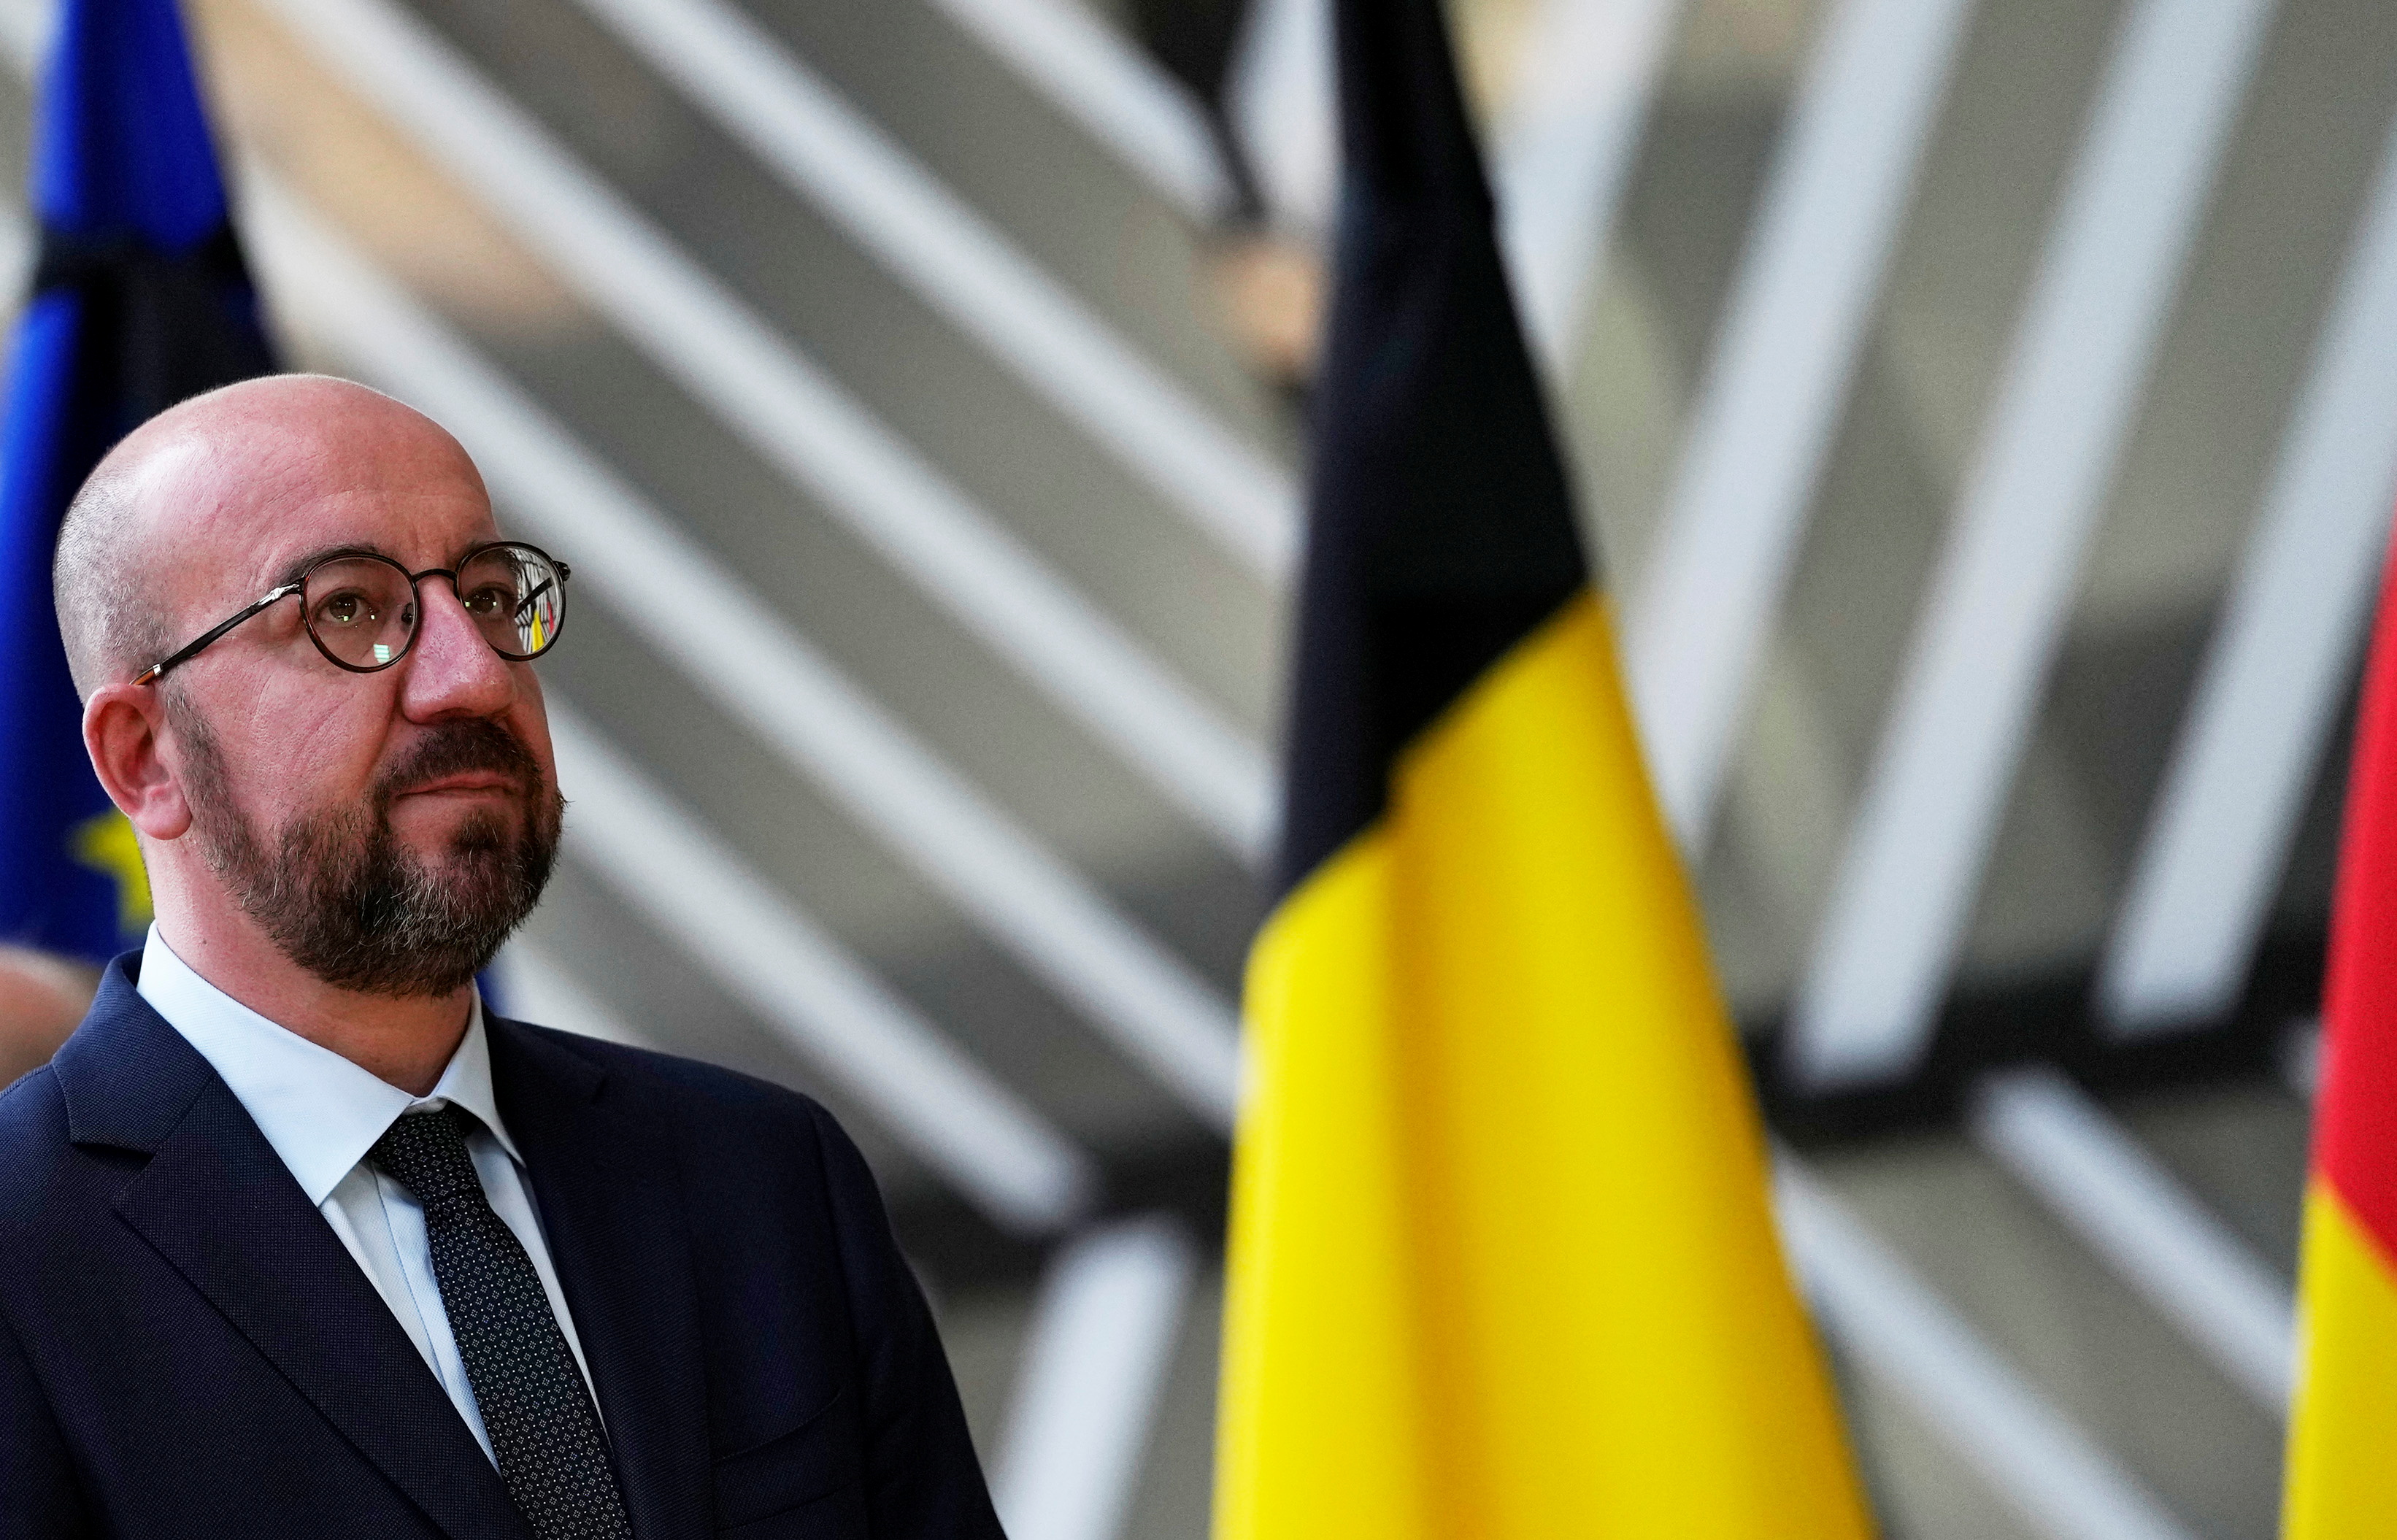 European Council President Charles Michel pauses for one minute of silence to pay respect to victims of the recent floods in Europe, at the EU Council in Brussels, Belgium, July 20, 2021. Virginia Mayo/Pool via REUTERS